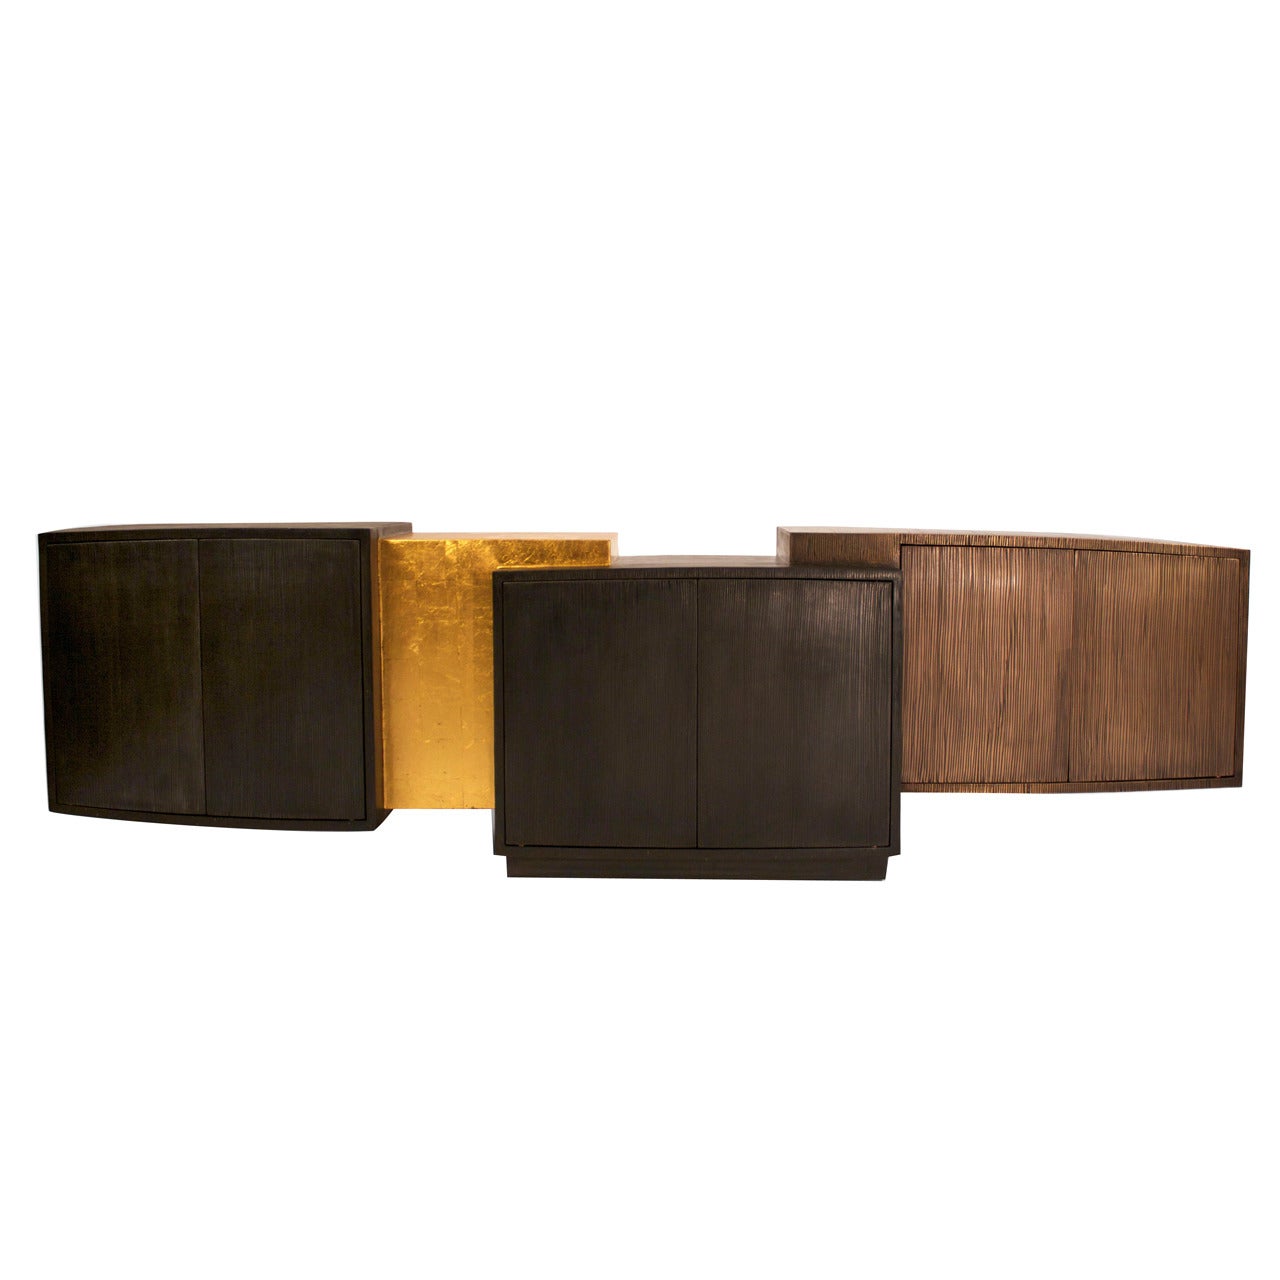 Blackened, Gilt Steel, Bronze Double Console by Gary Magakis, USA, 2013 For Sale